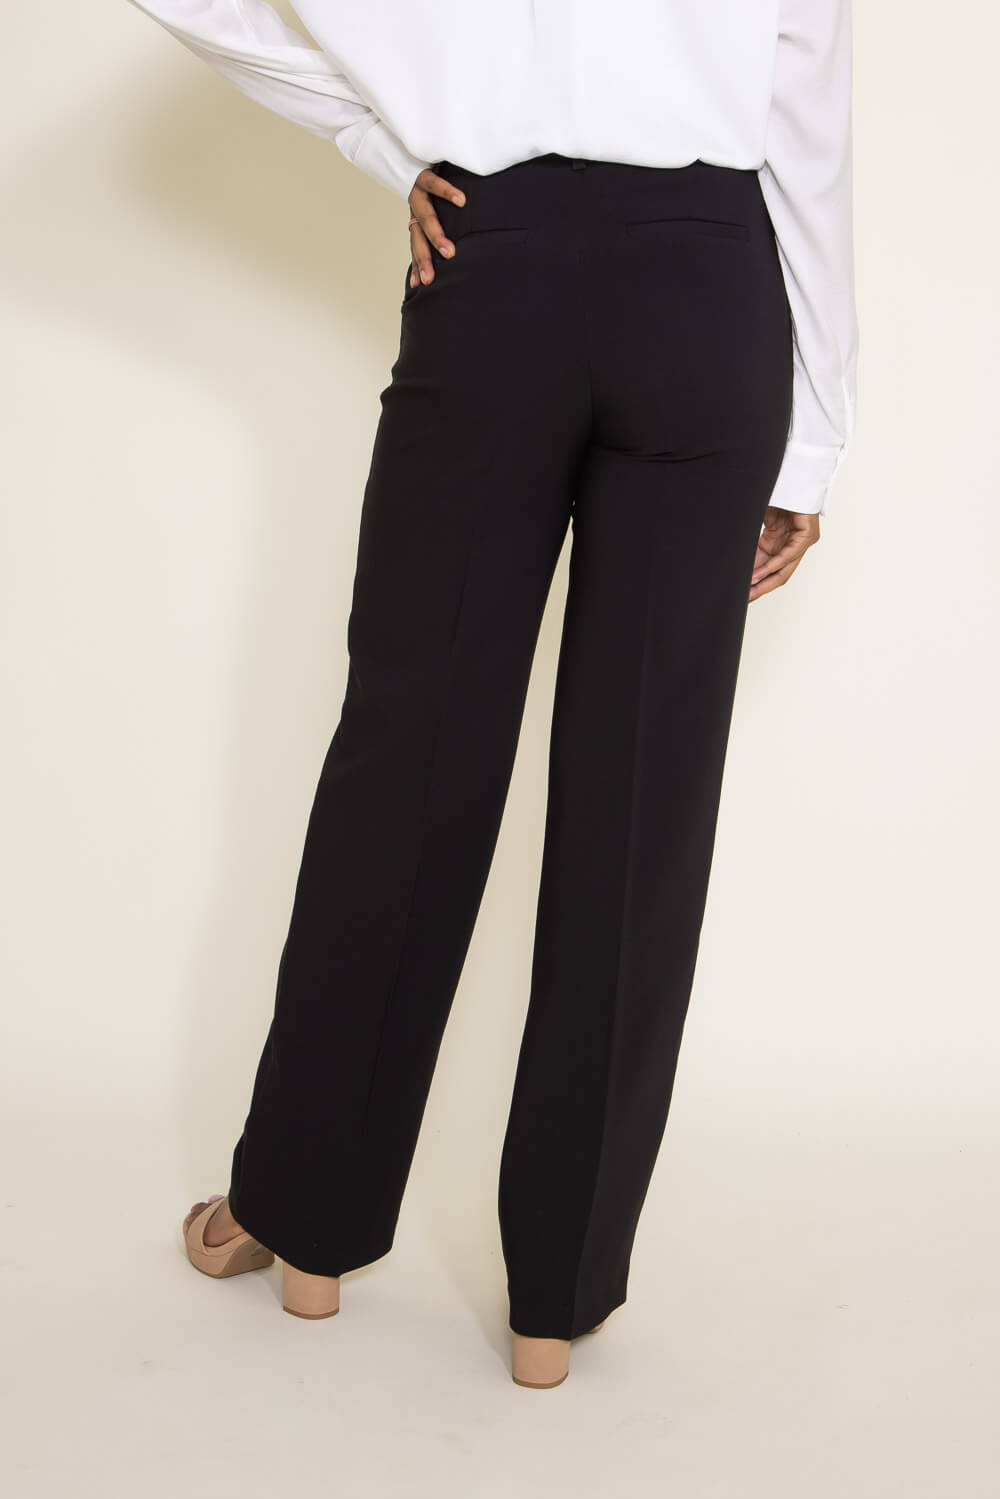 Strictly Business Black High Waisted Trouser Pants | Business casual  outfits for work, Stylish work outfits, Business outfits women